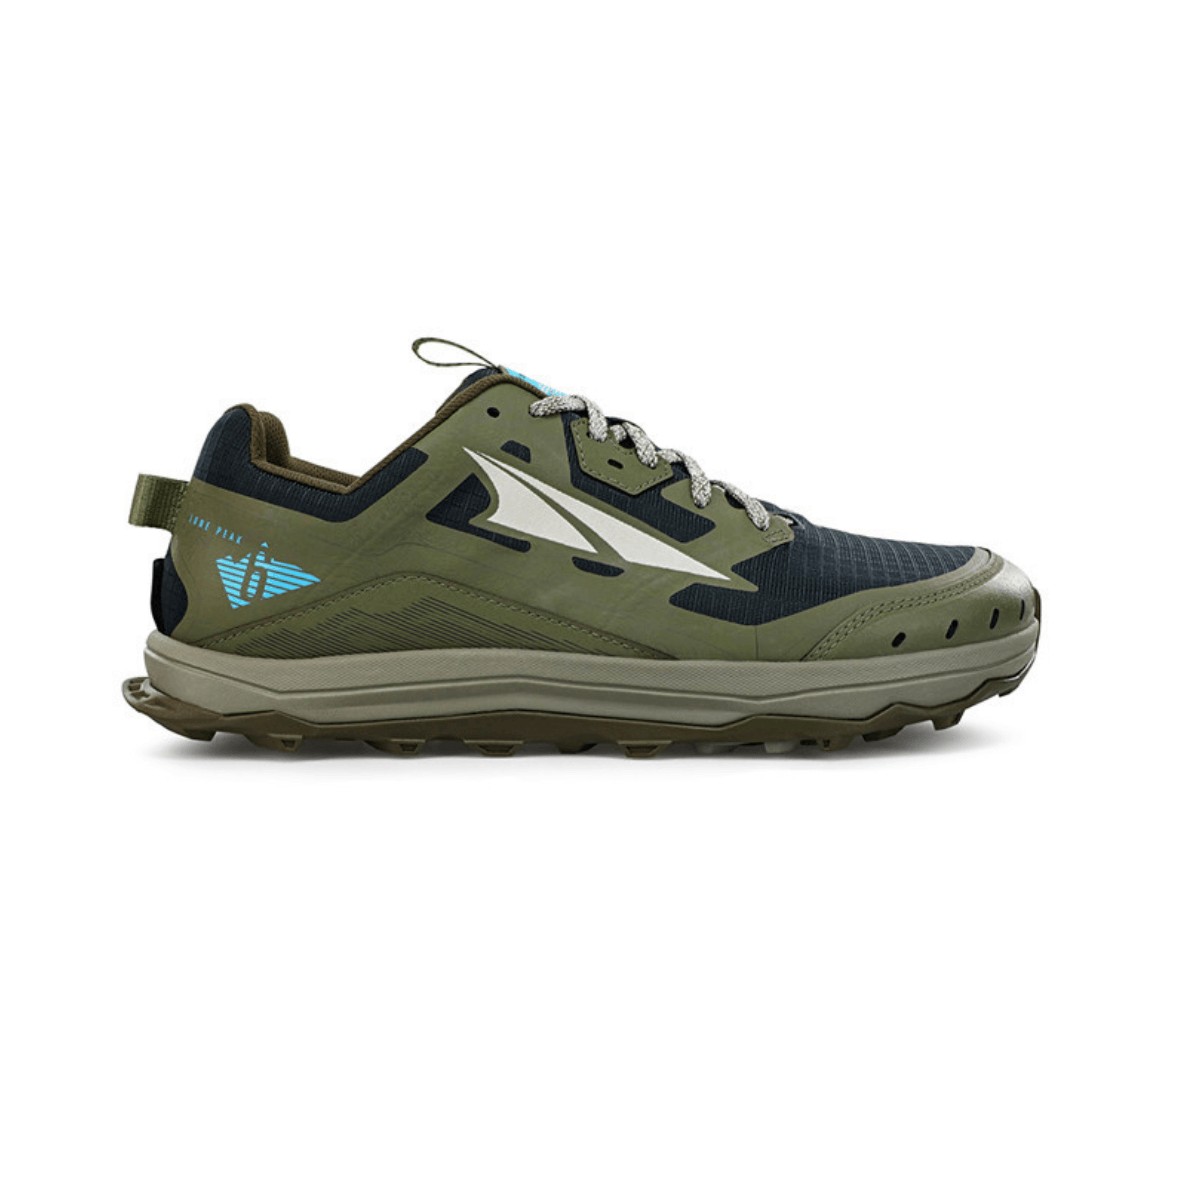 Altra Lone Peak 6 Shoes Olive Green SS22, Size 42 - EUR